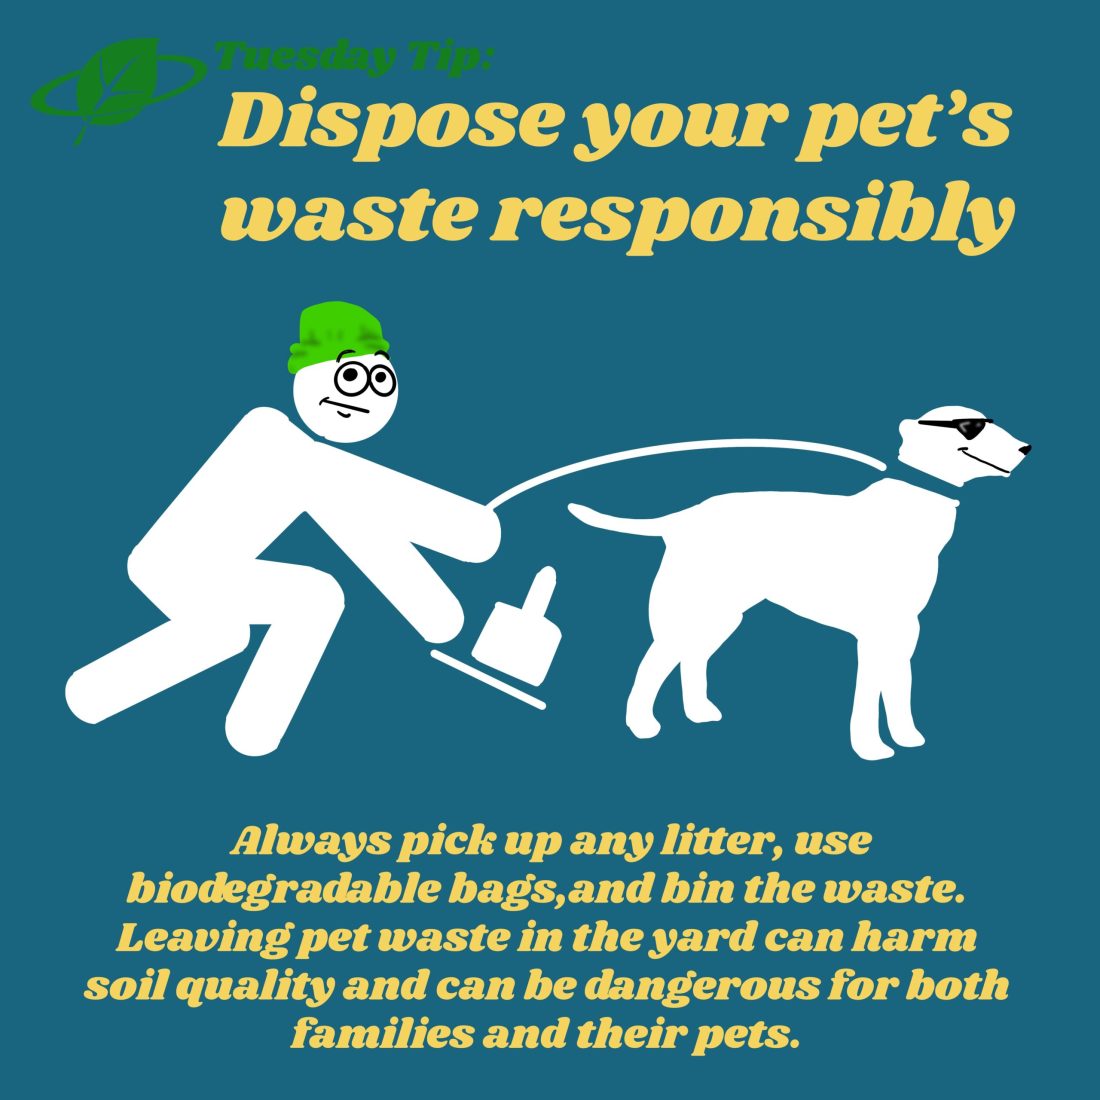 Dispose your pet’s waste responsibly | Tuesday Tip